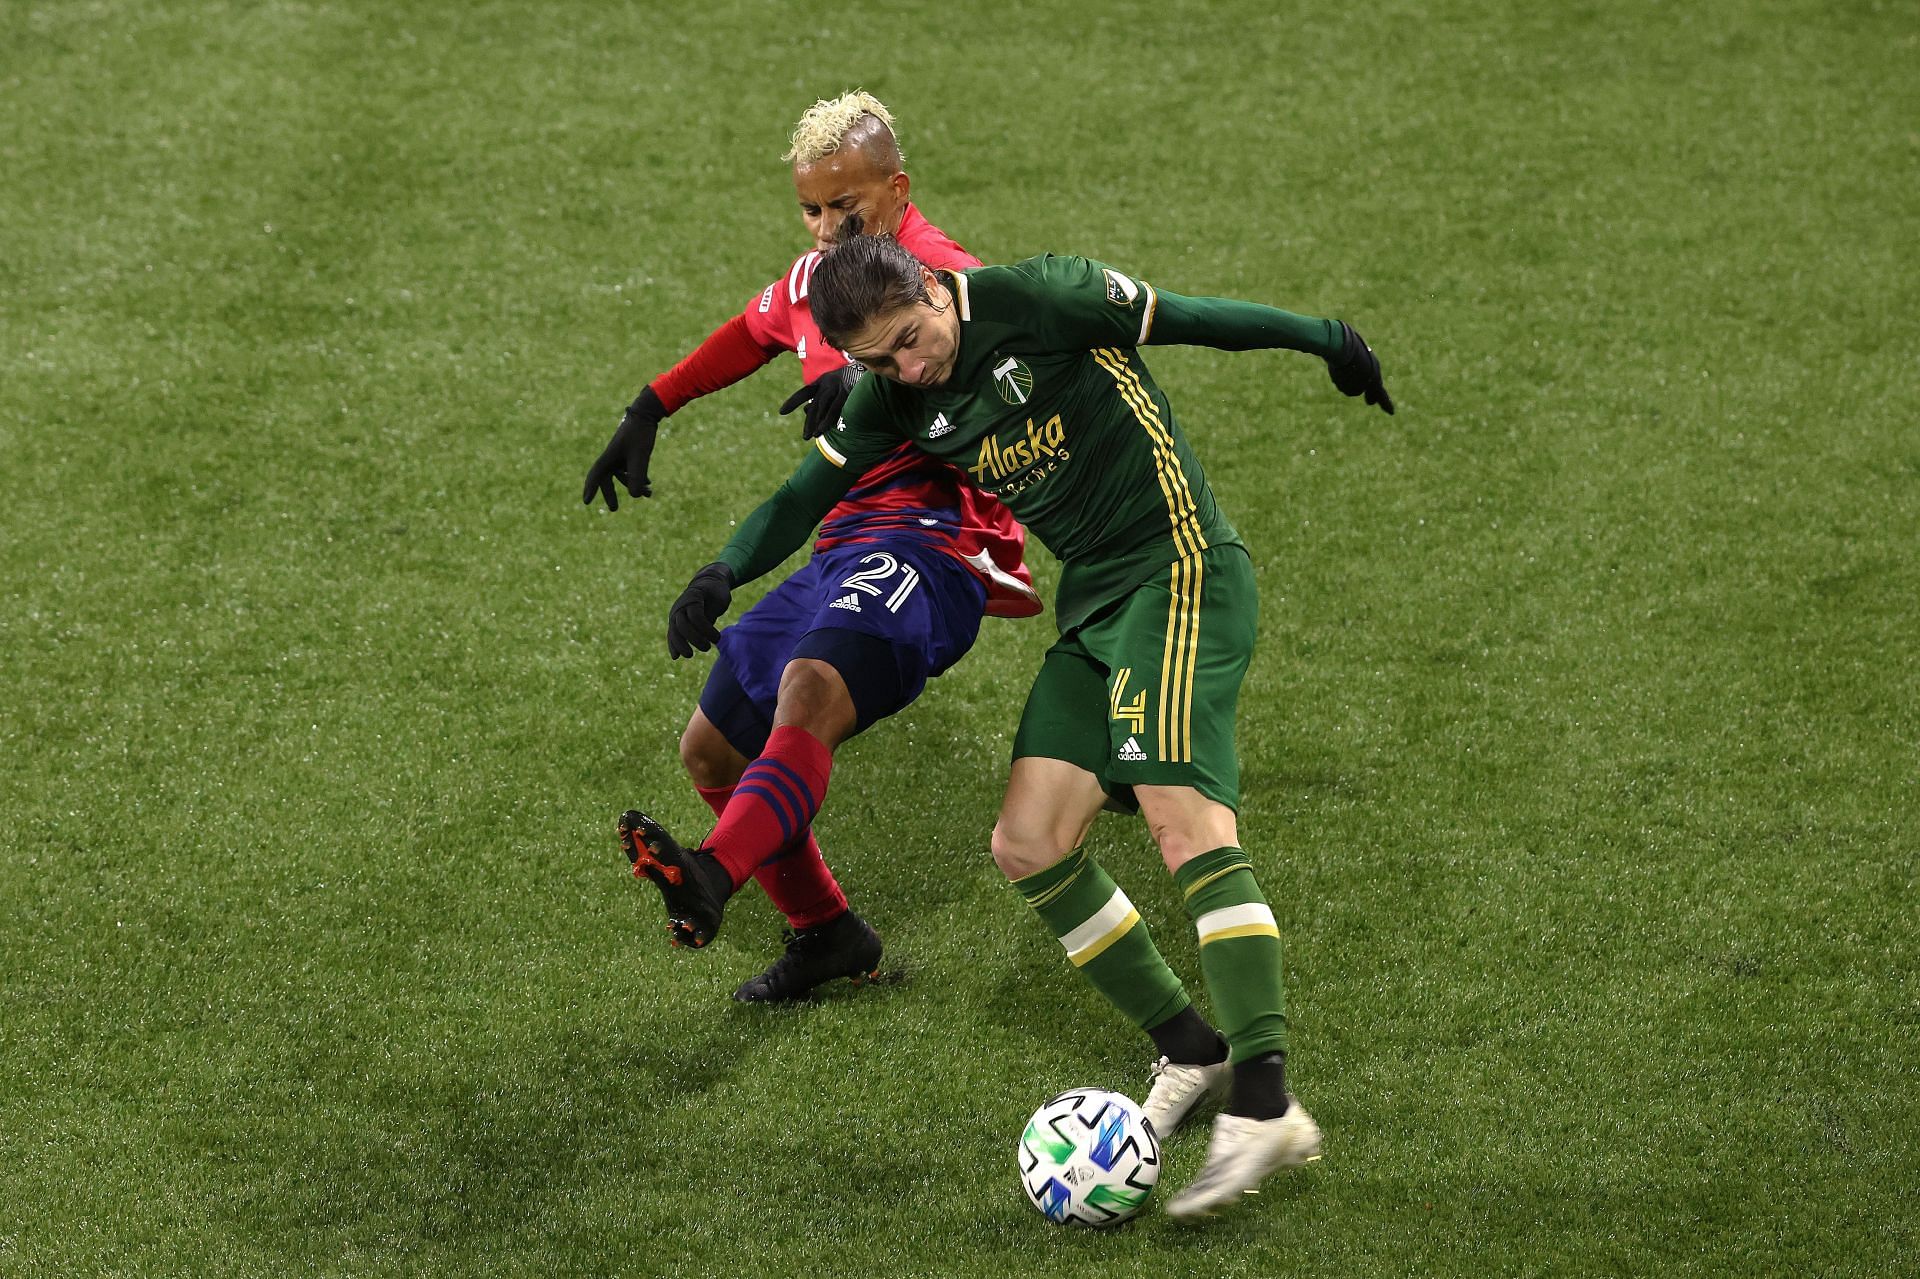 FC Dallas and Portland Timbers meet on Saturday